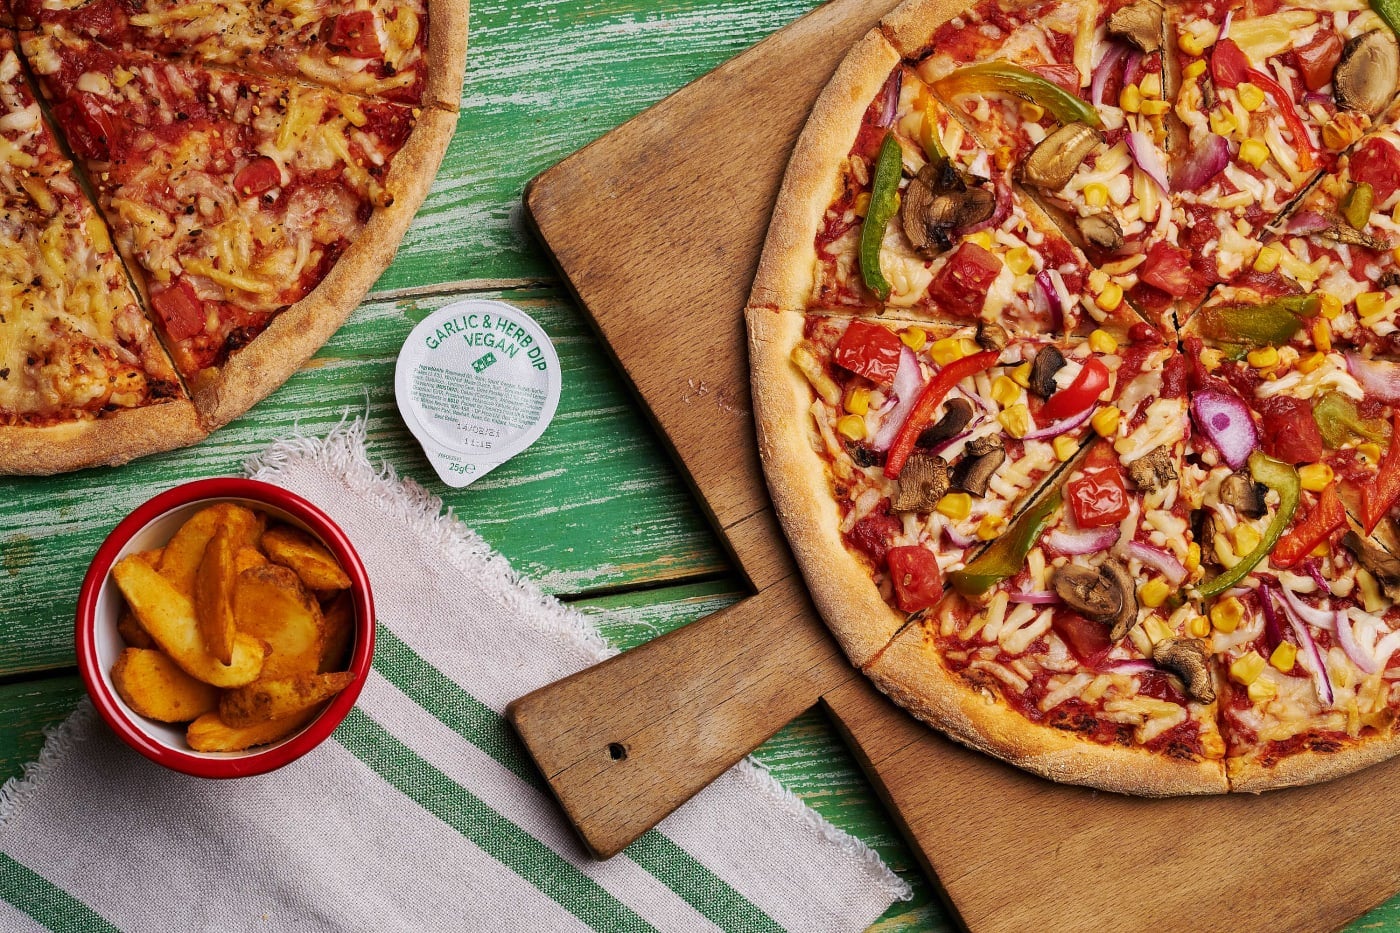 Domino's has launched two new vegan pizzas across the UK